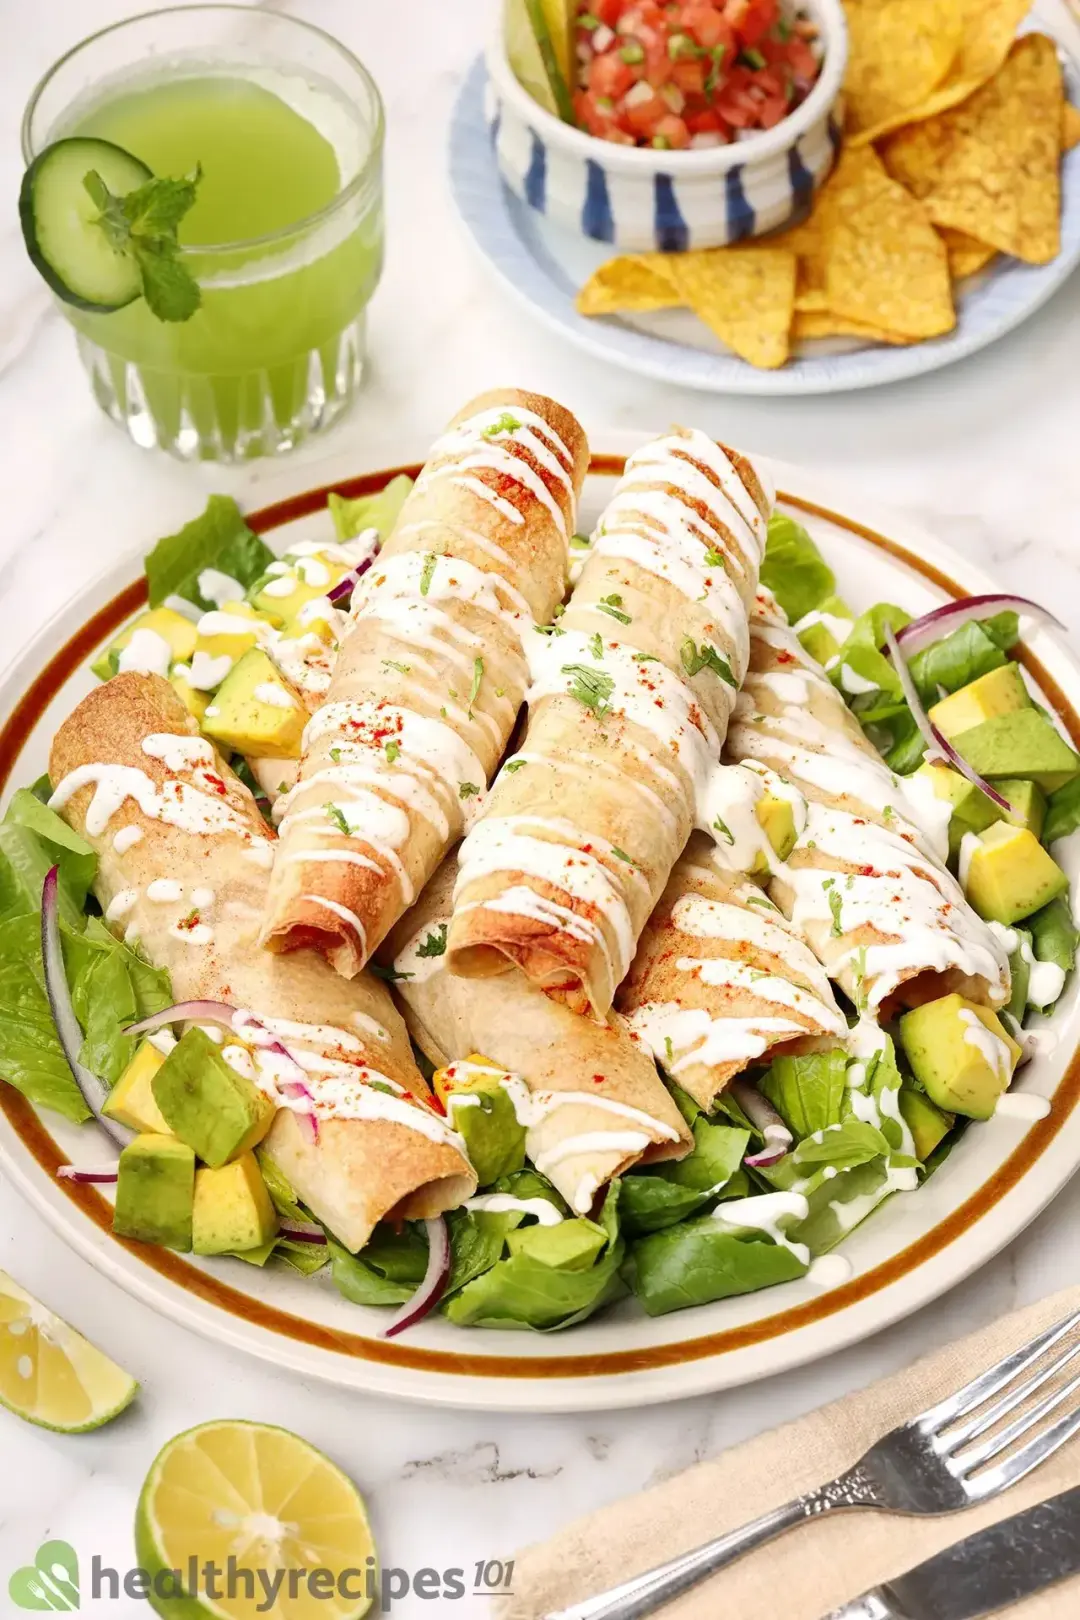 What to Serve With Chicken Flautas